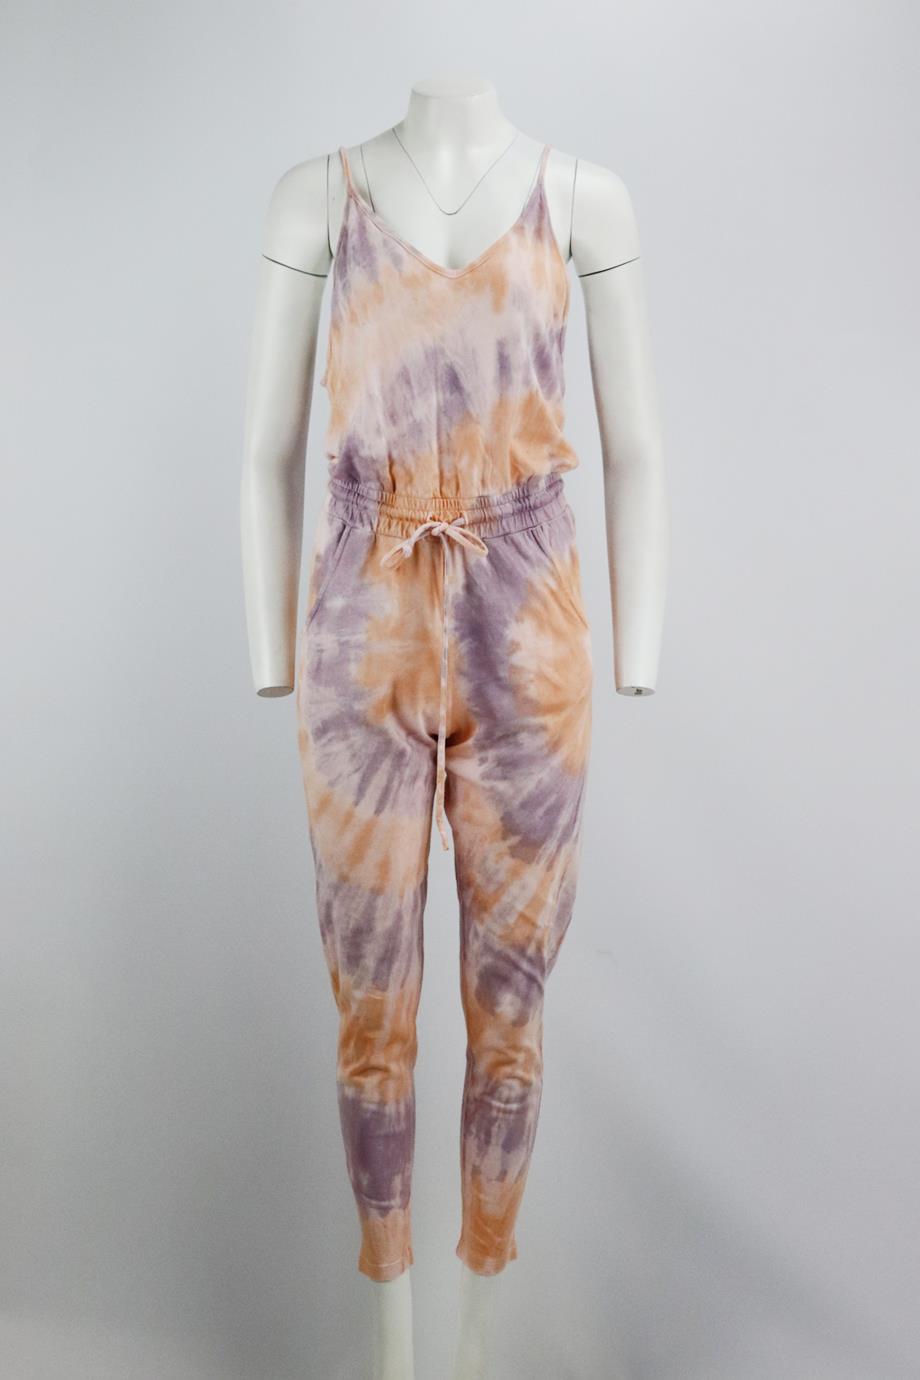 WILDFOX TIE DYED STRETCH COTTON JUMPSUIT SMALL